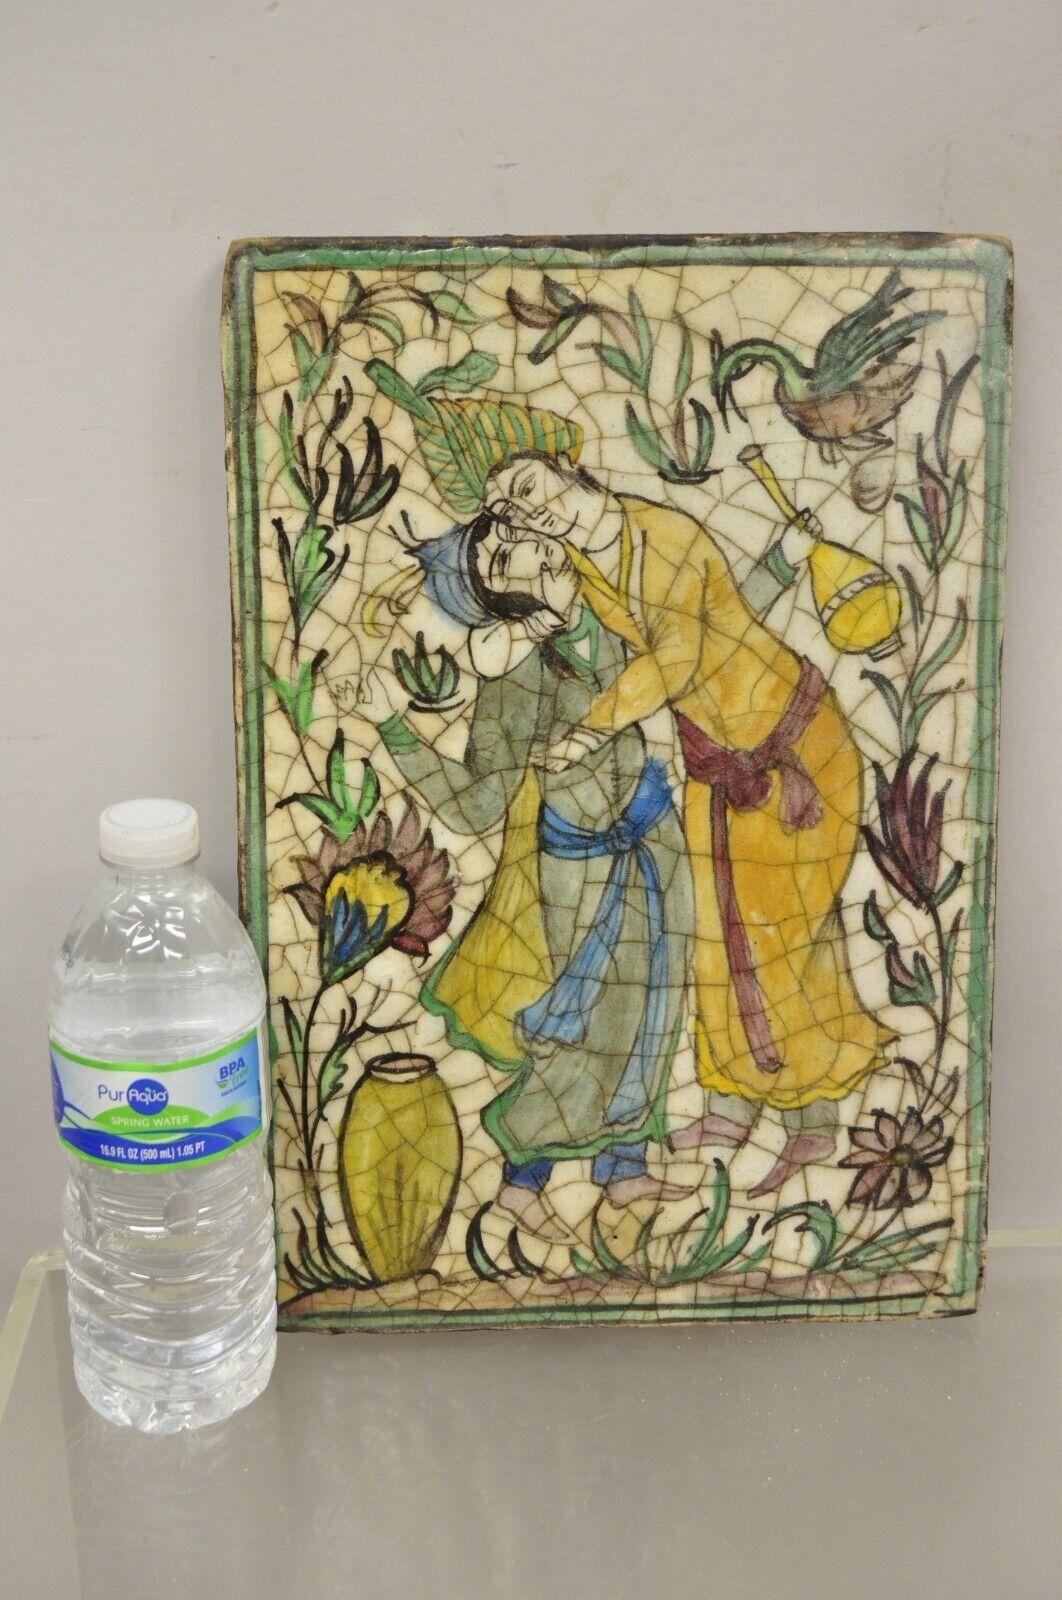 Antique Persian Iznik Qajar Style Ceramic Pottery Tile Green Man and Lady Embrace C2. Item features an original crackle glazed finish, heavy ceramic pottery construction, very impressive detail, wonderful style and form. Great to mount as wall art